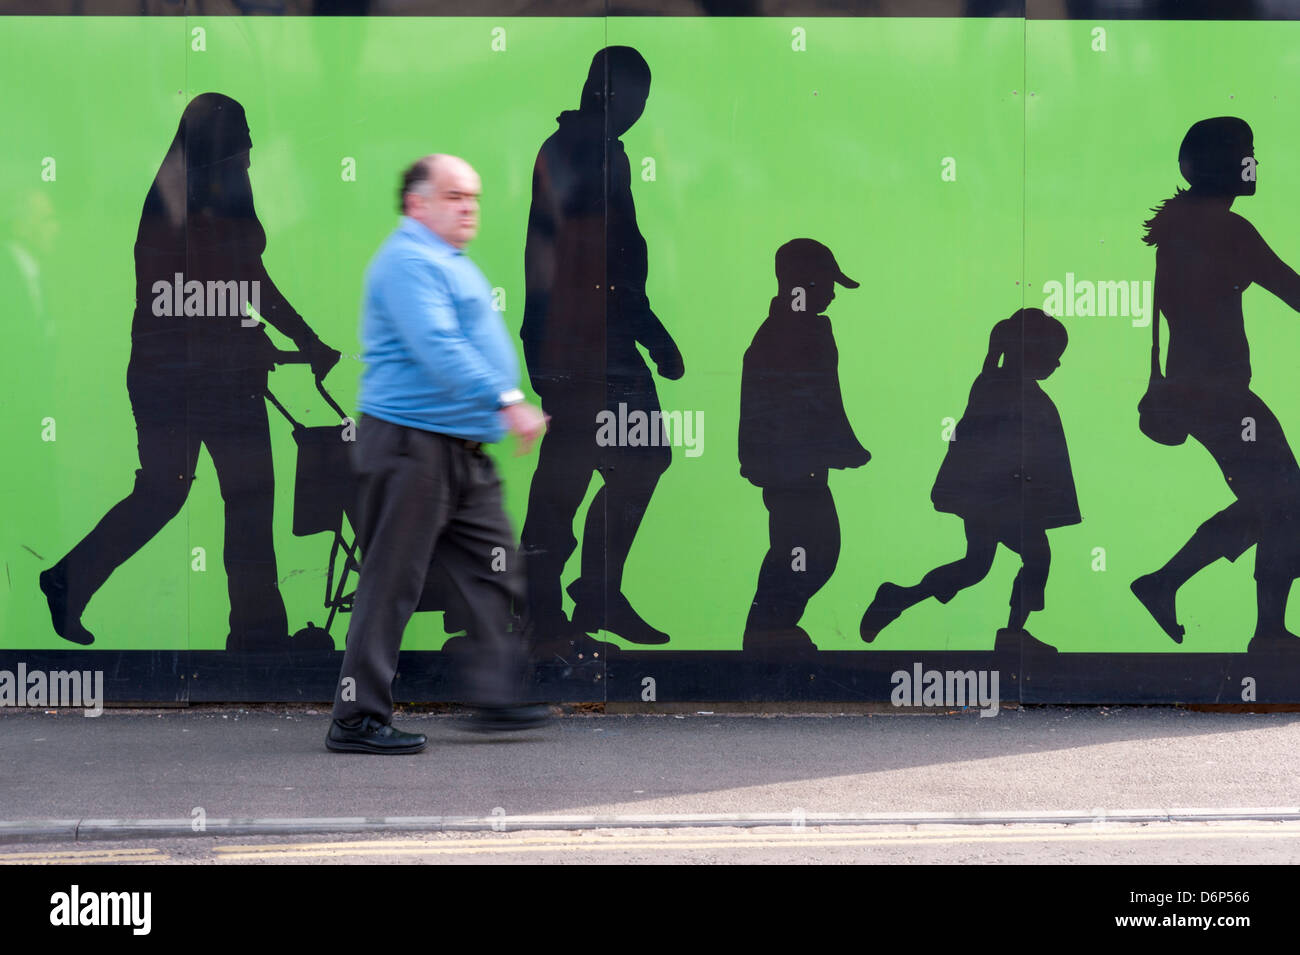 Real people walking in front of a city mural which has painted silhouettes of people walking in the background in Cambridge UK Stock Photo